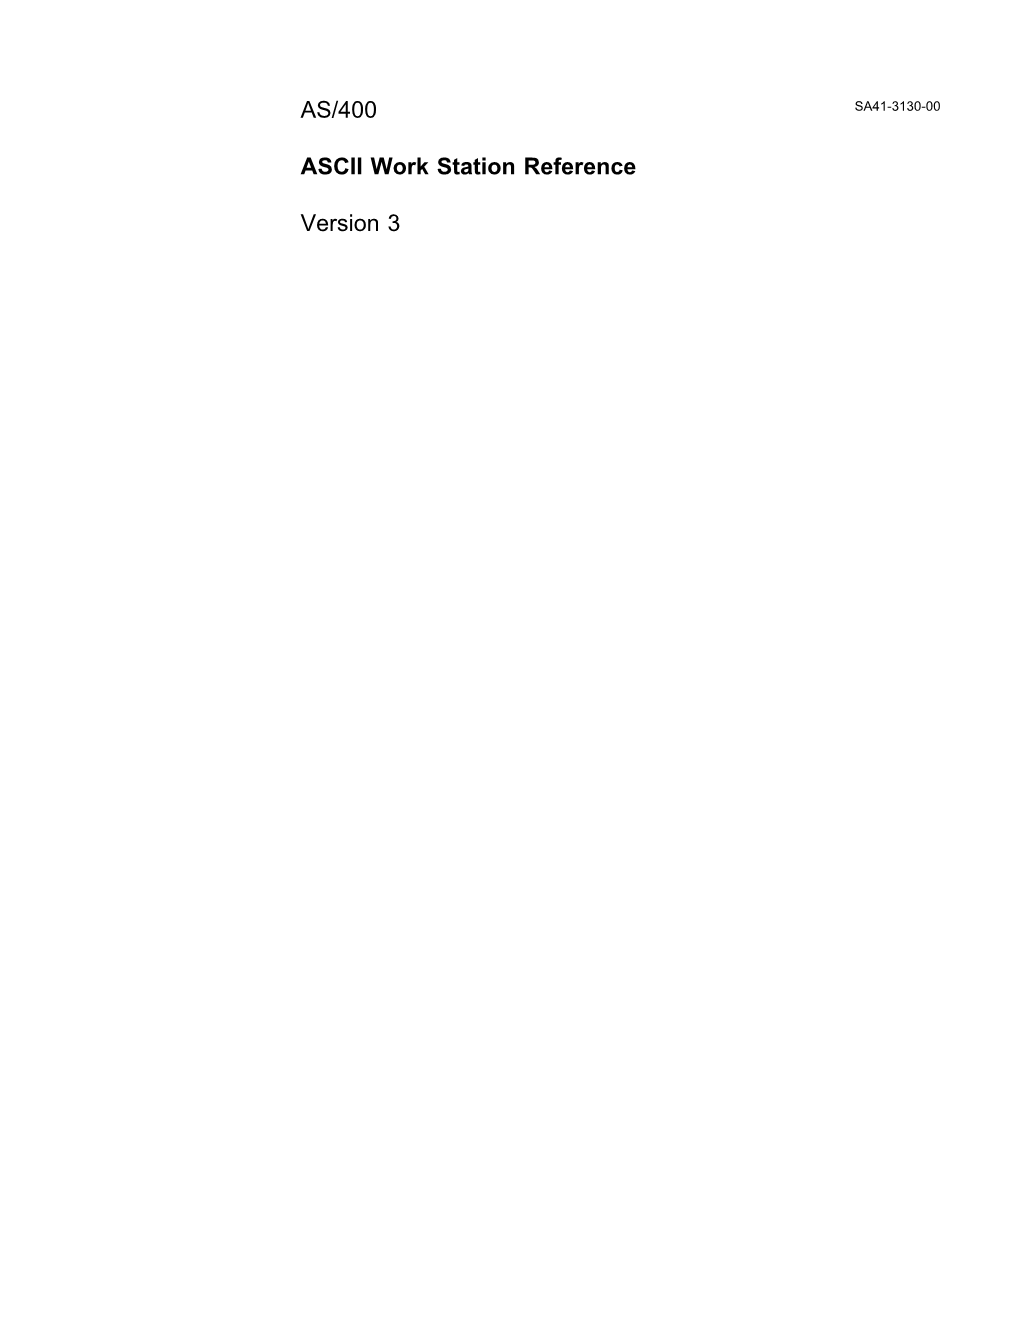 AS/400 ASCII Work Station Reference Version 3 Publication No